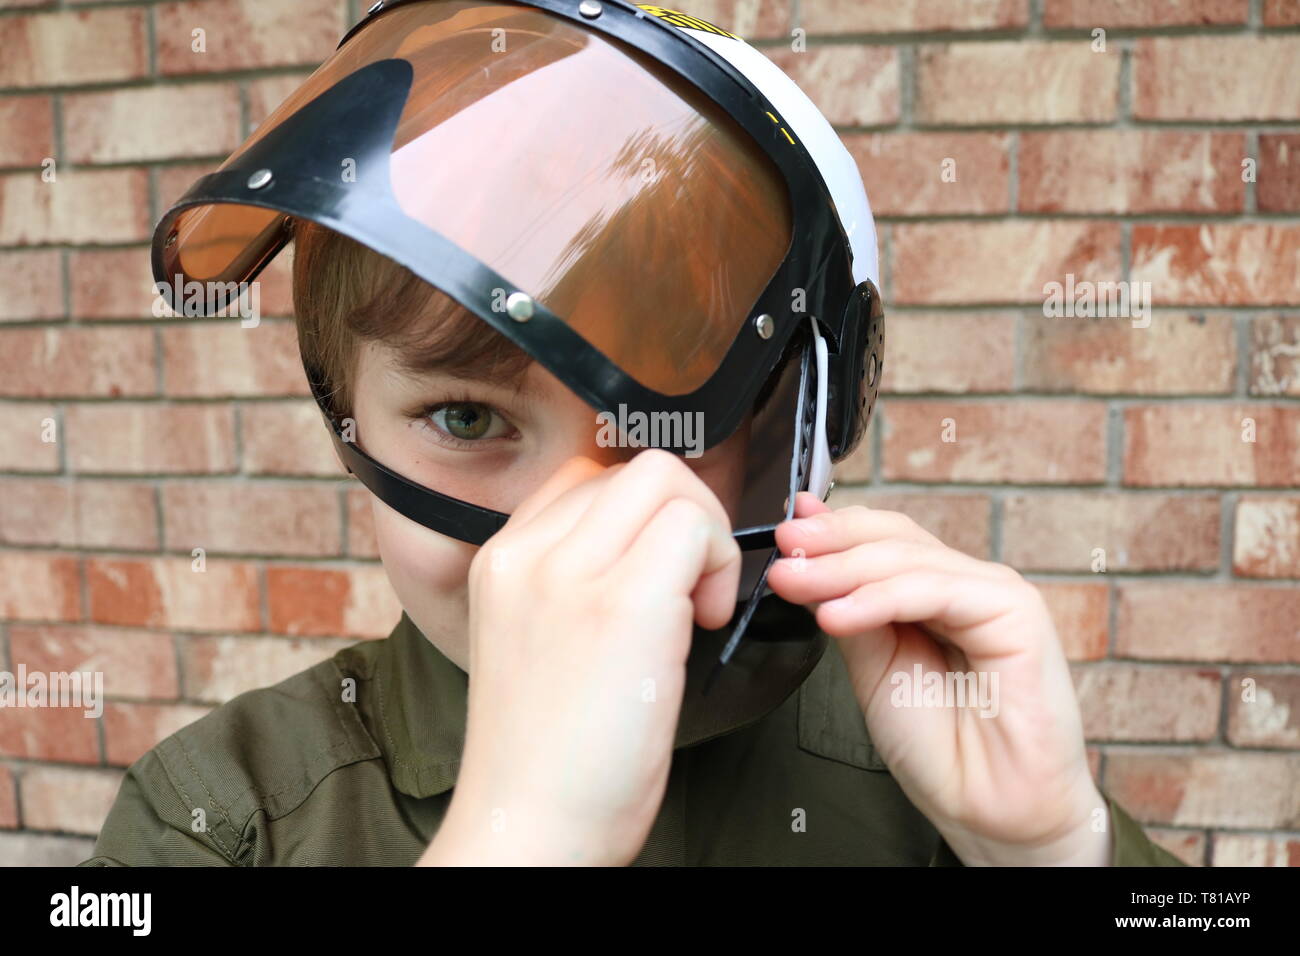 Child dressing up as a fighter pilot for Halloween Stock Photo